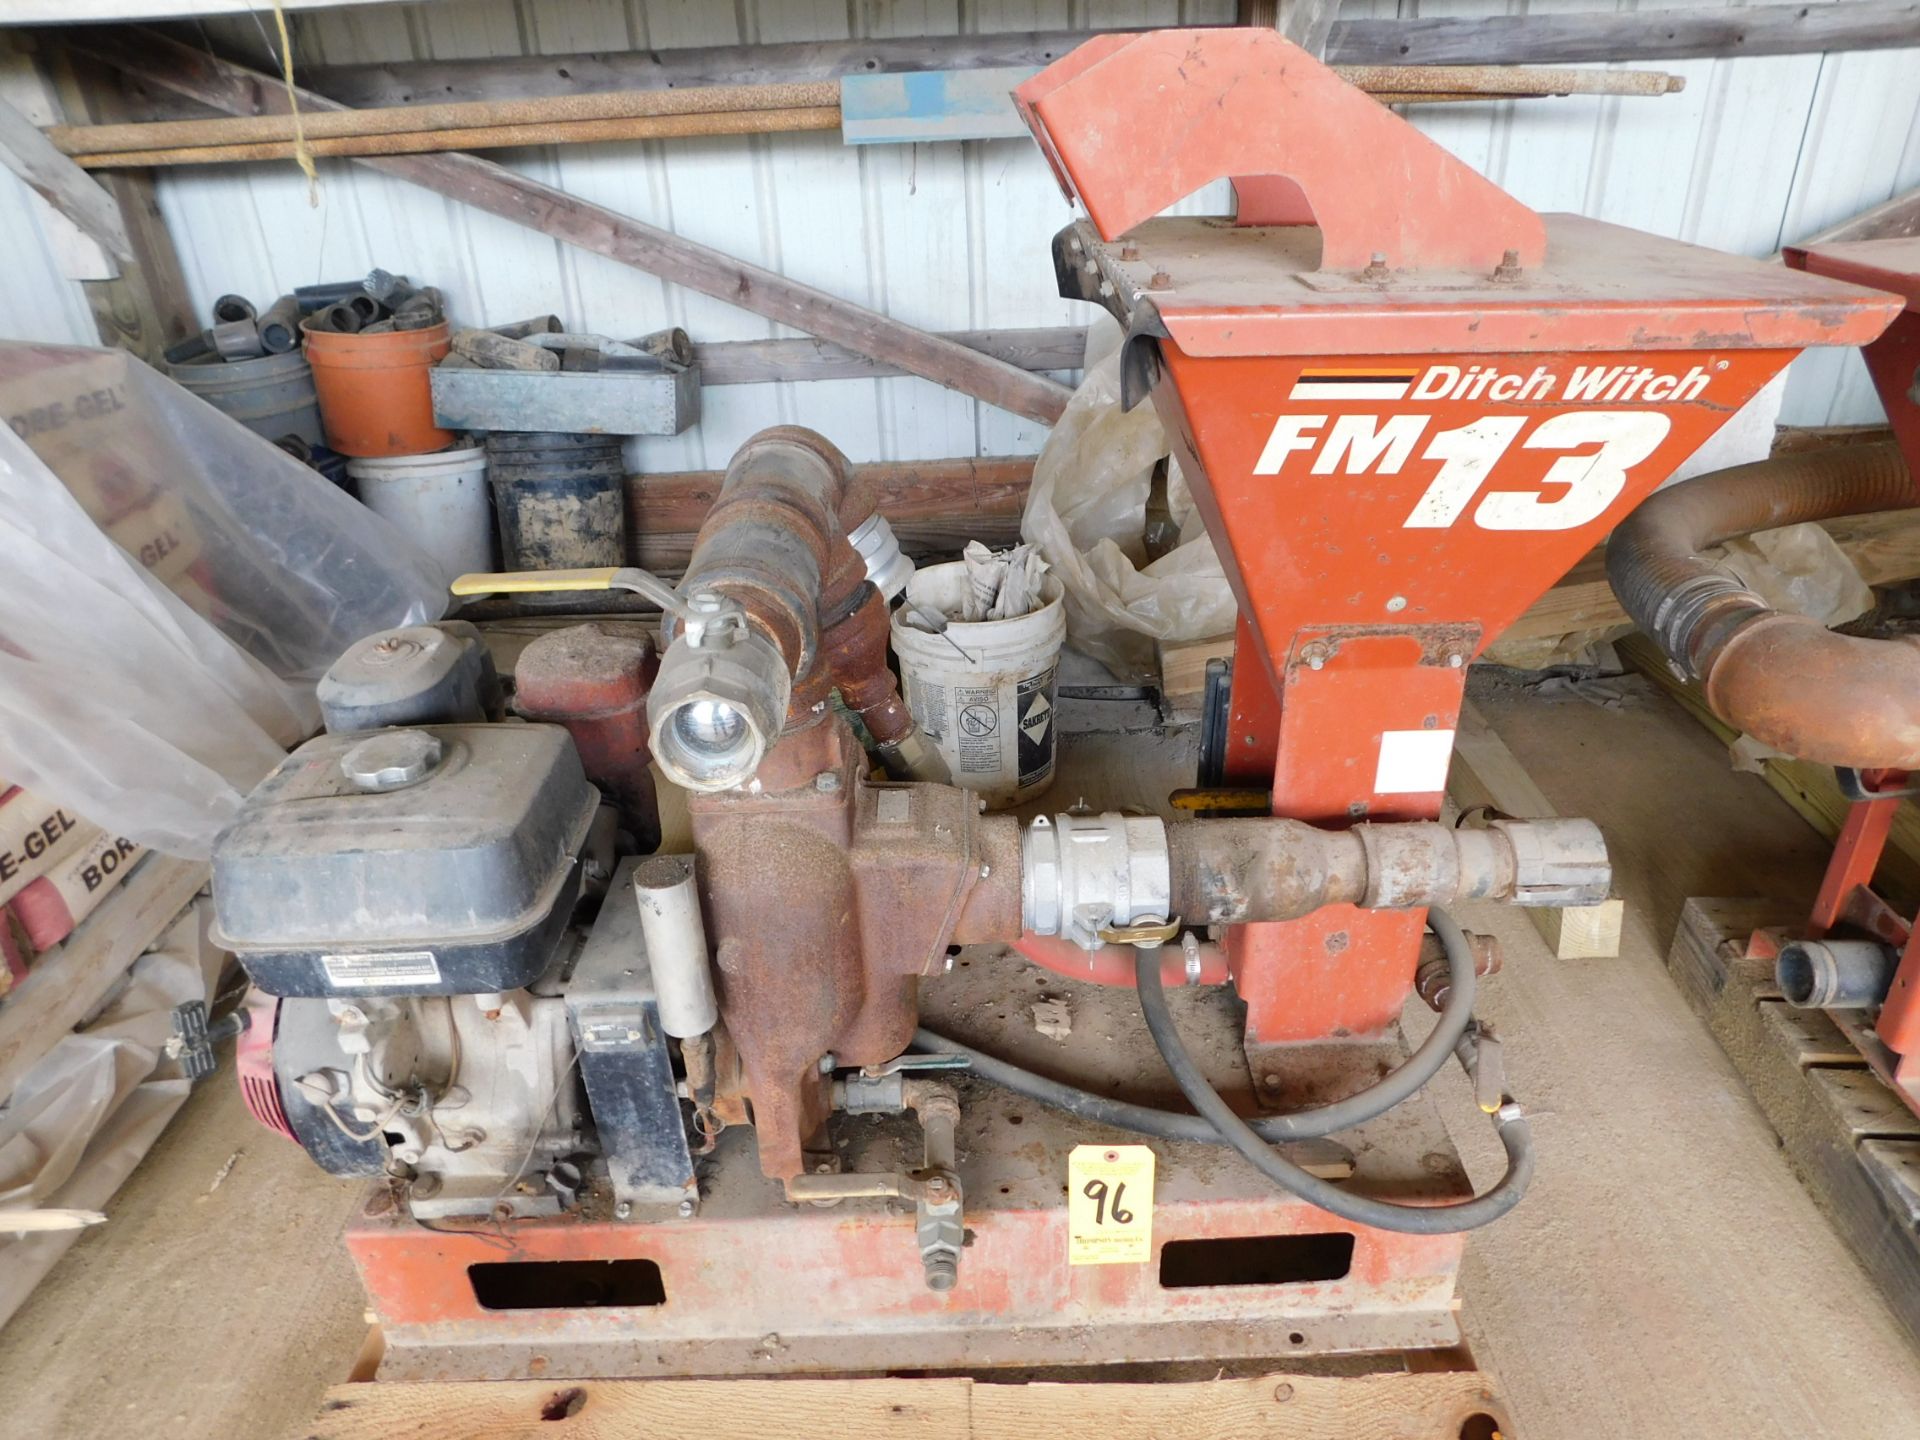 Ditch Witch FM13 Gas Powered Fluid Mixing System, s/n CMWFM13XL60000105, New 2006